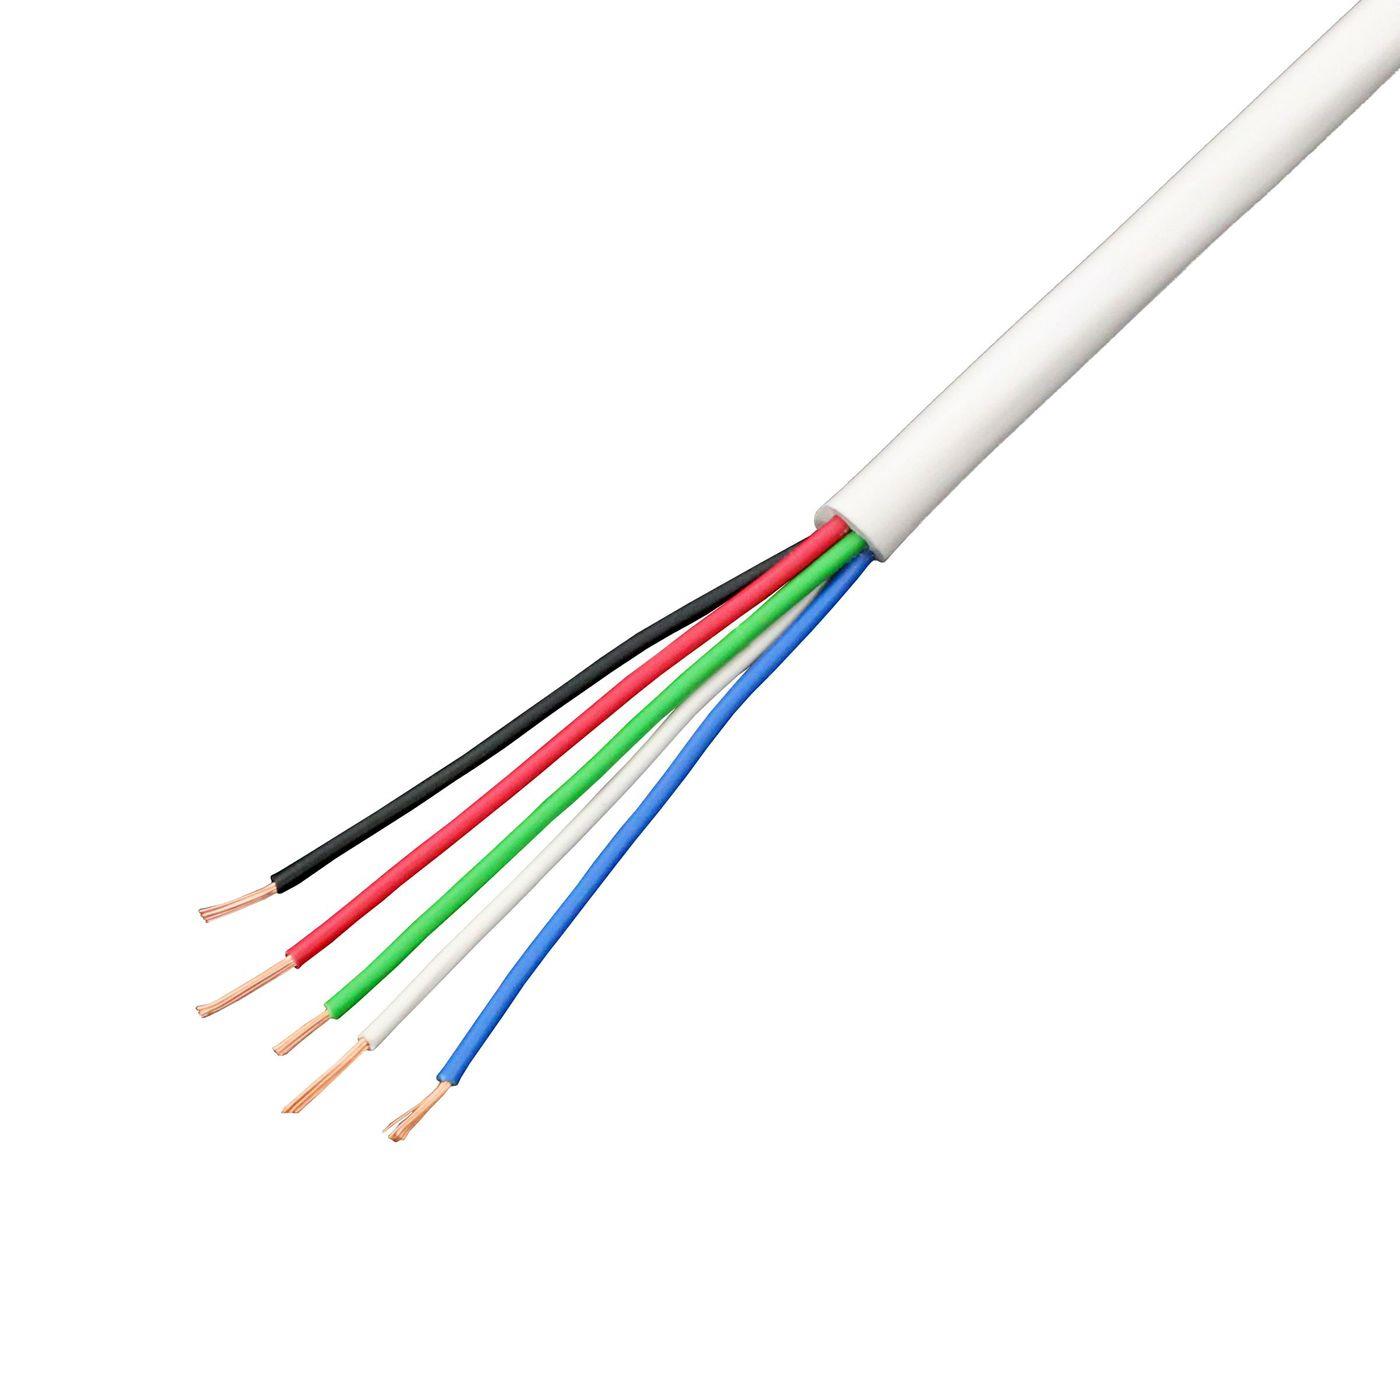 1m RGBW LED Control cable 5x 0,34mm² LiYY Extension 5 wire Power cable White